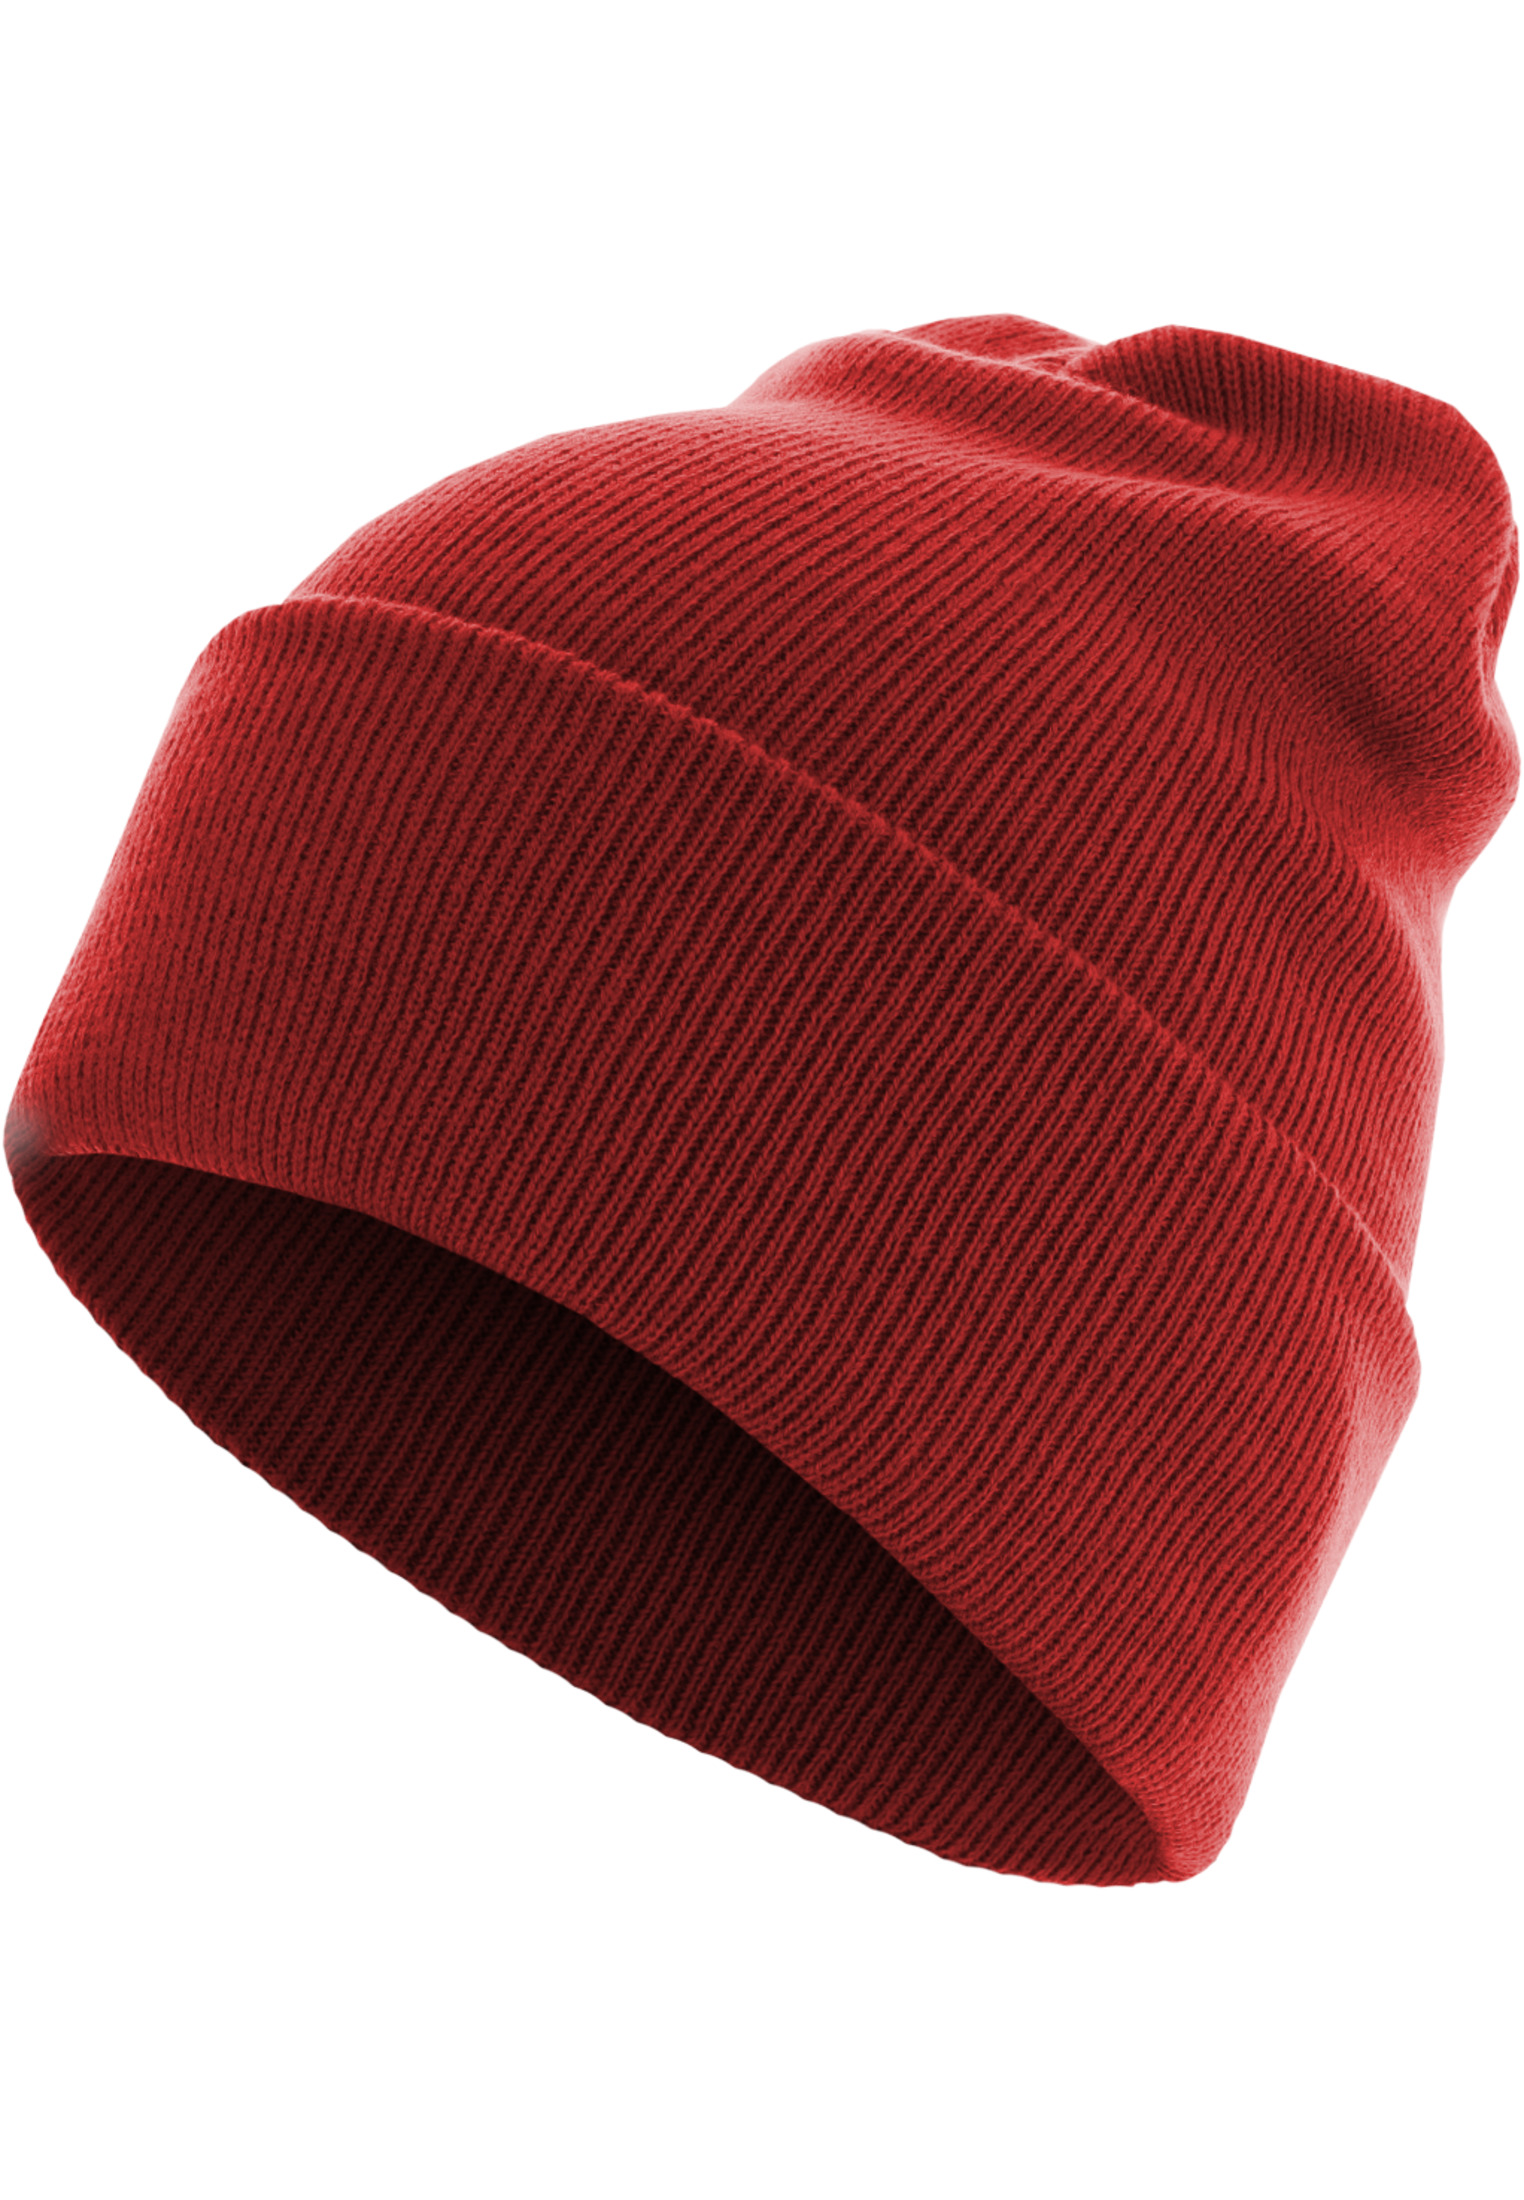 Caps & Beanies Beanie Basic Flap Long Version in Farbe red